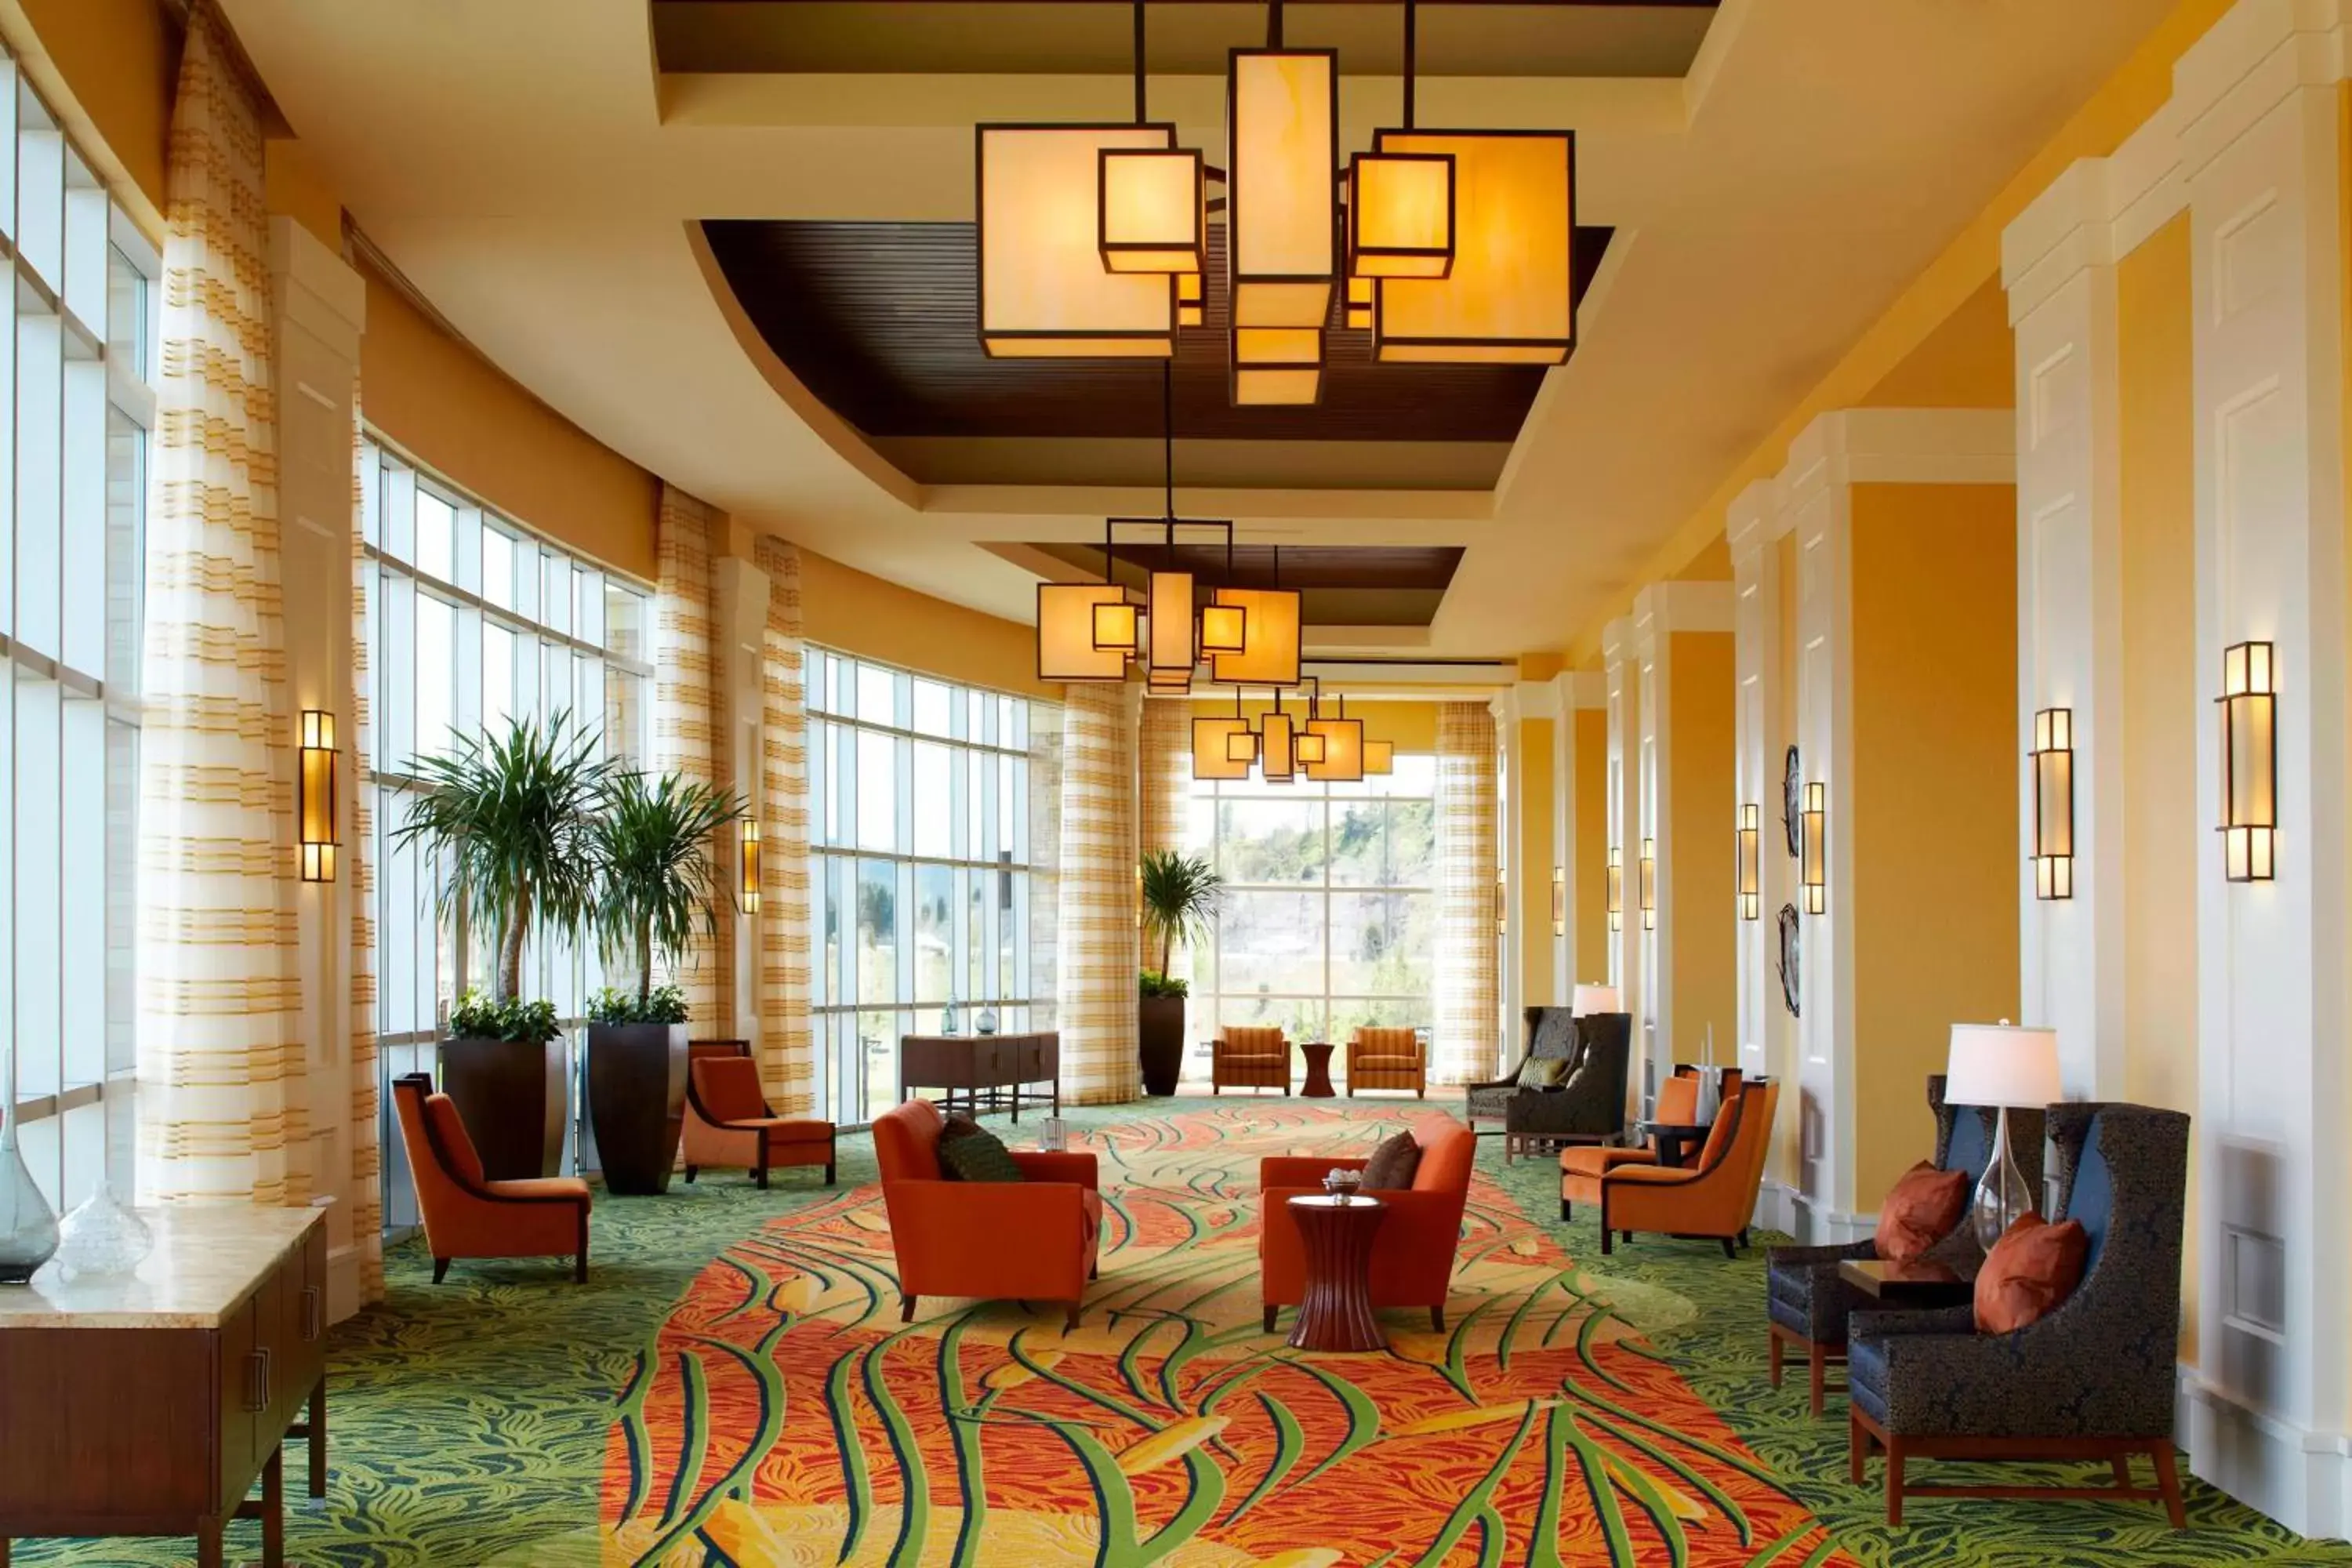 Meeting/conference room in MeadowView Marriott Conference Resort and Convention Center